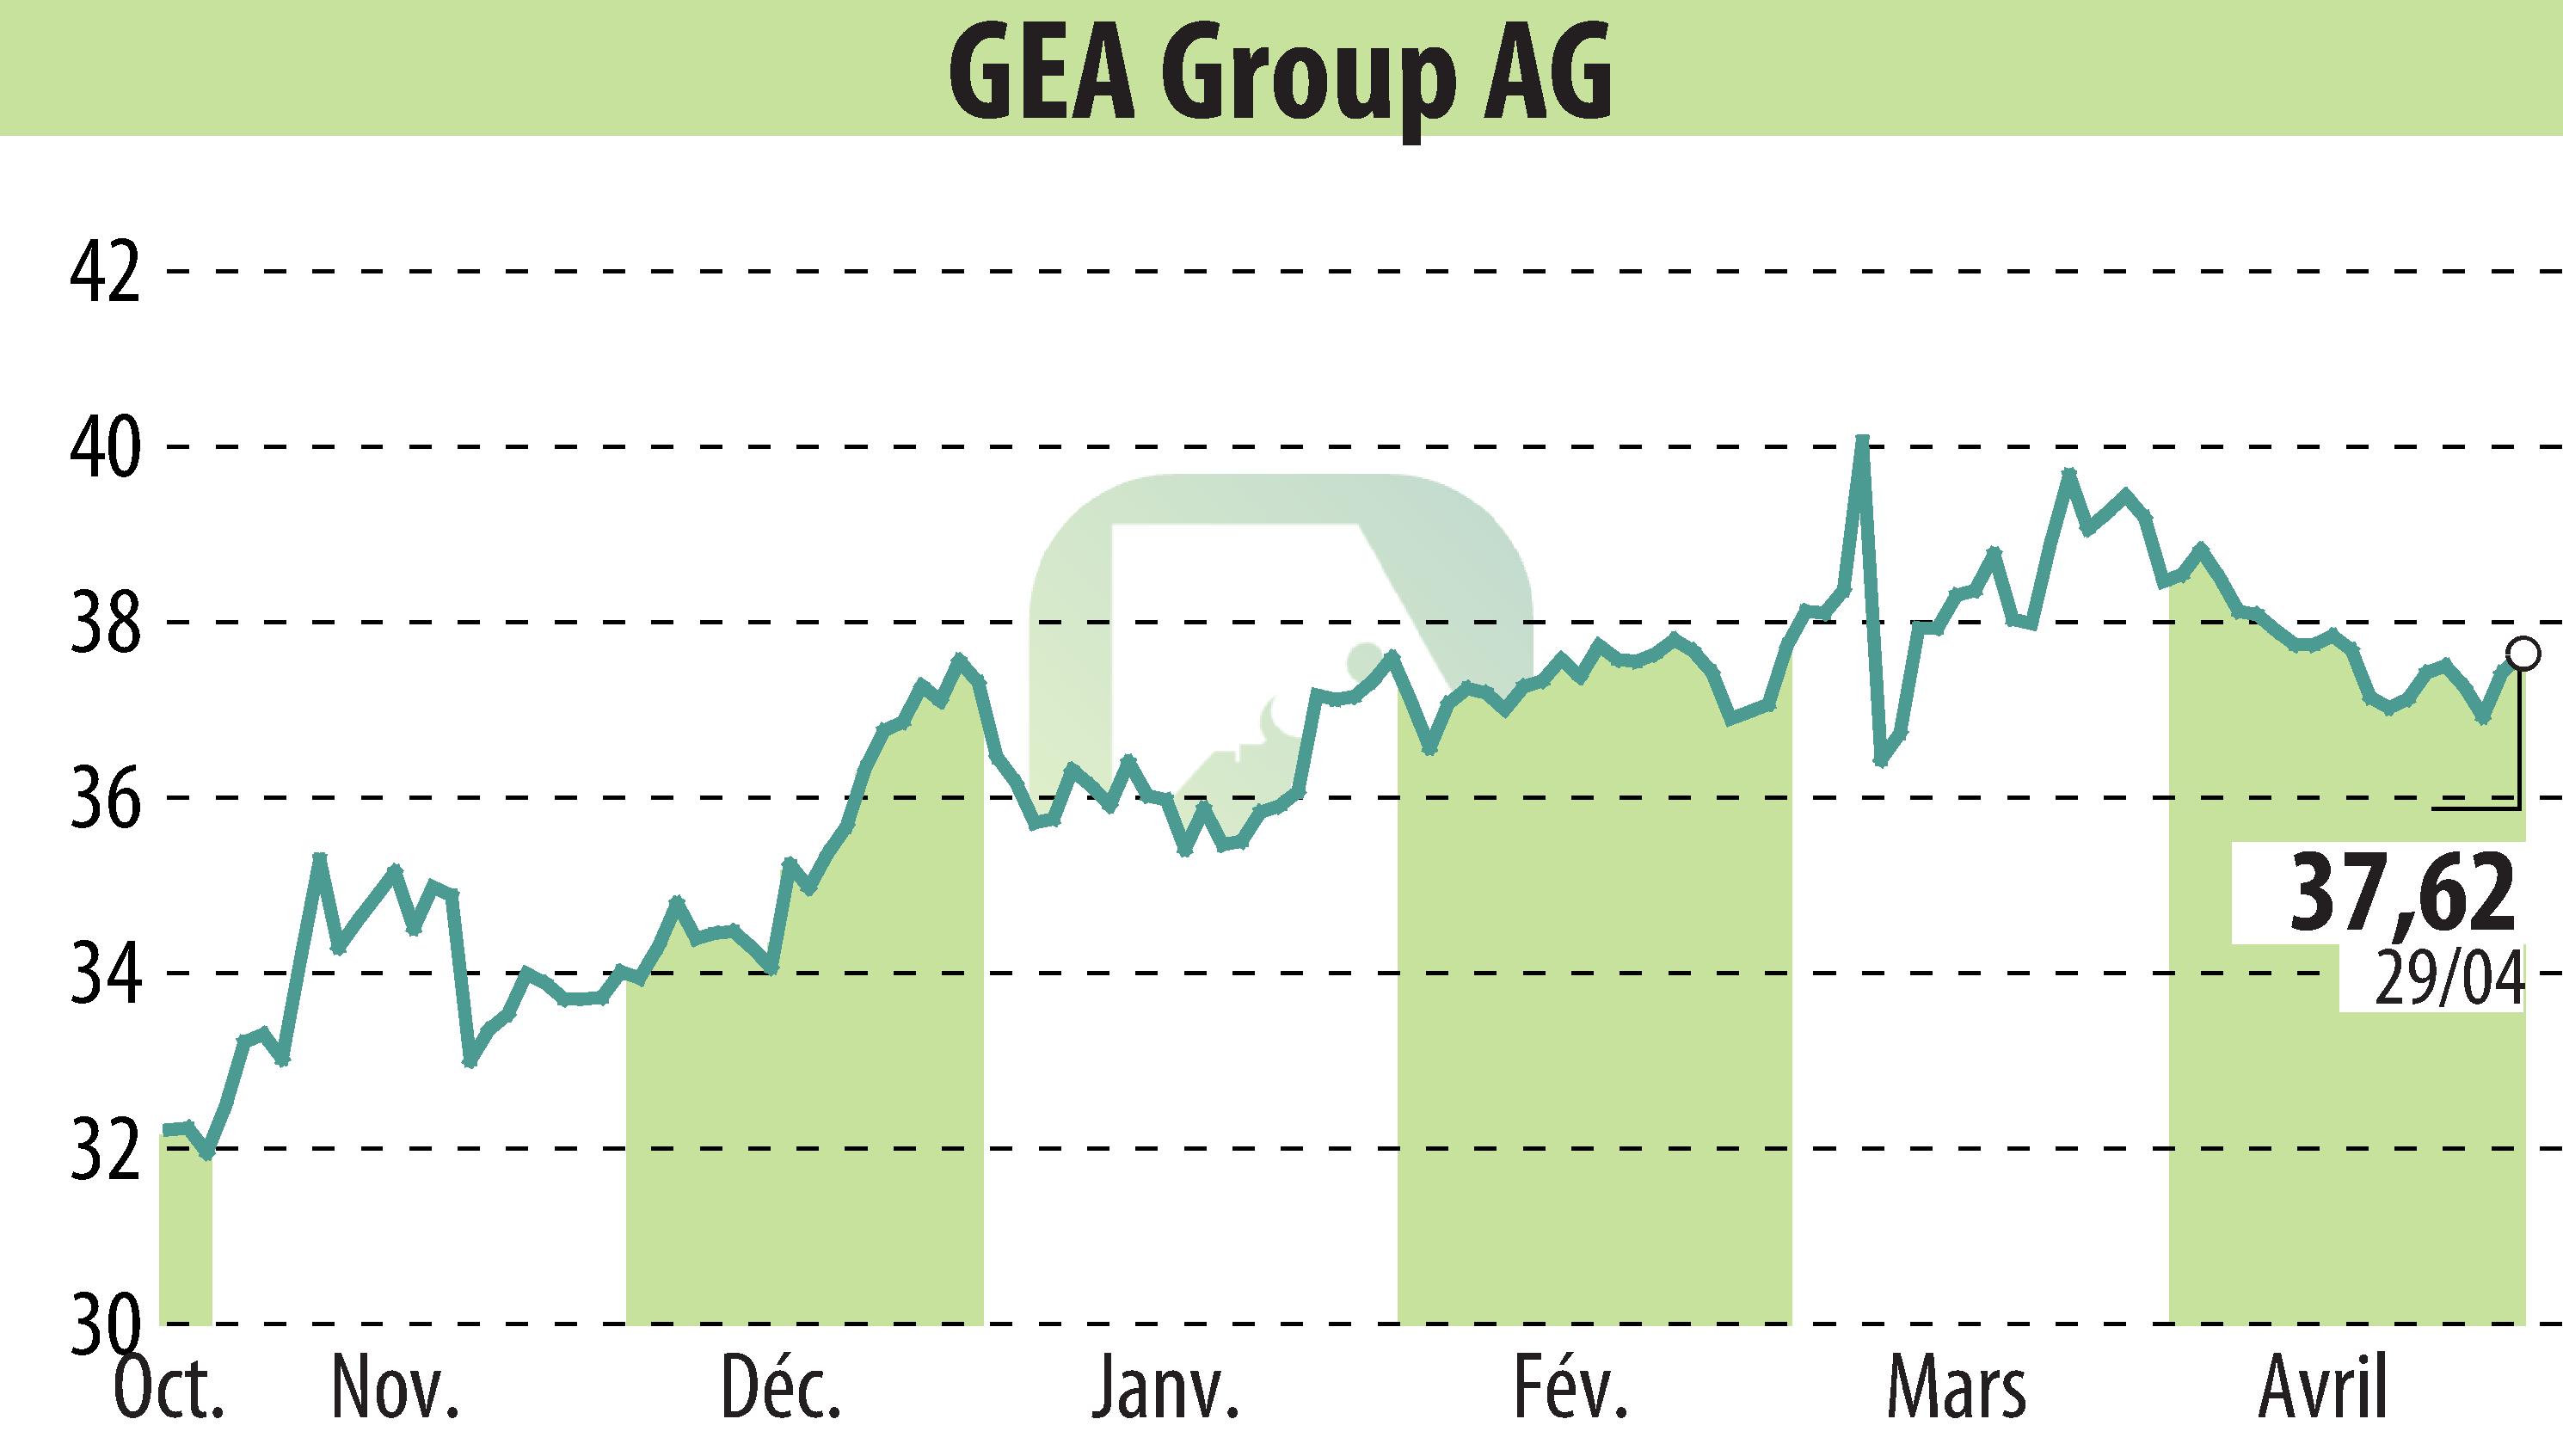 Stock price chart of GEA Group Aktiengesellschaft (EBR:G1A) showing fluctuations.